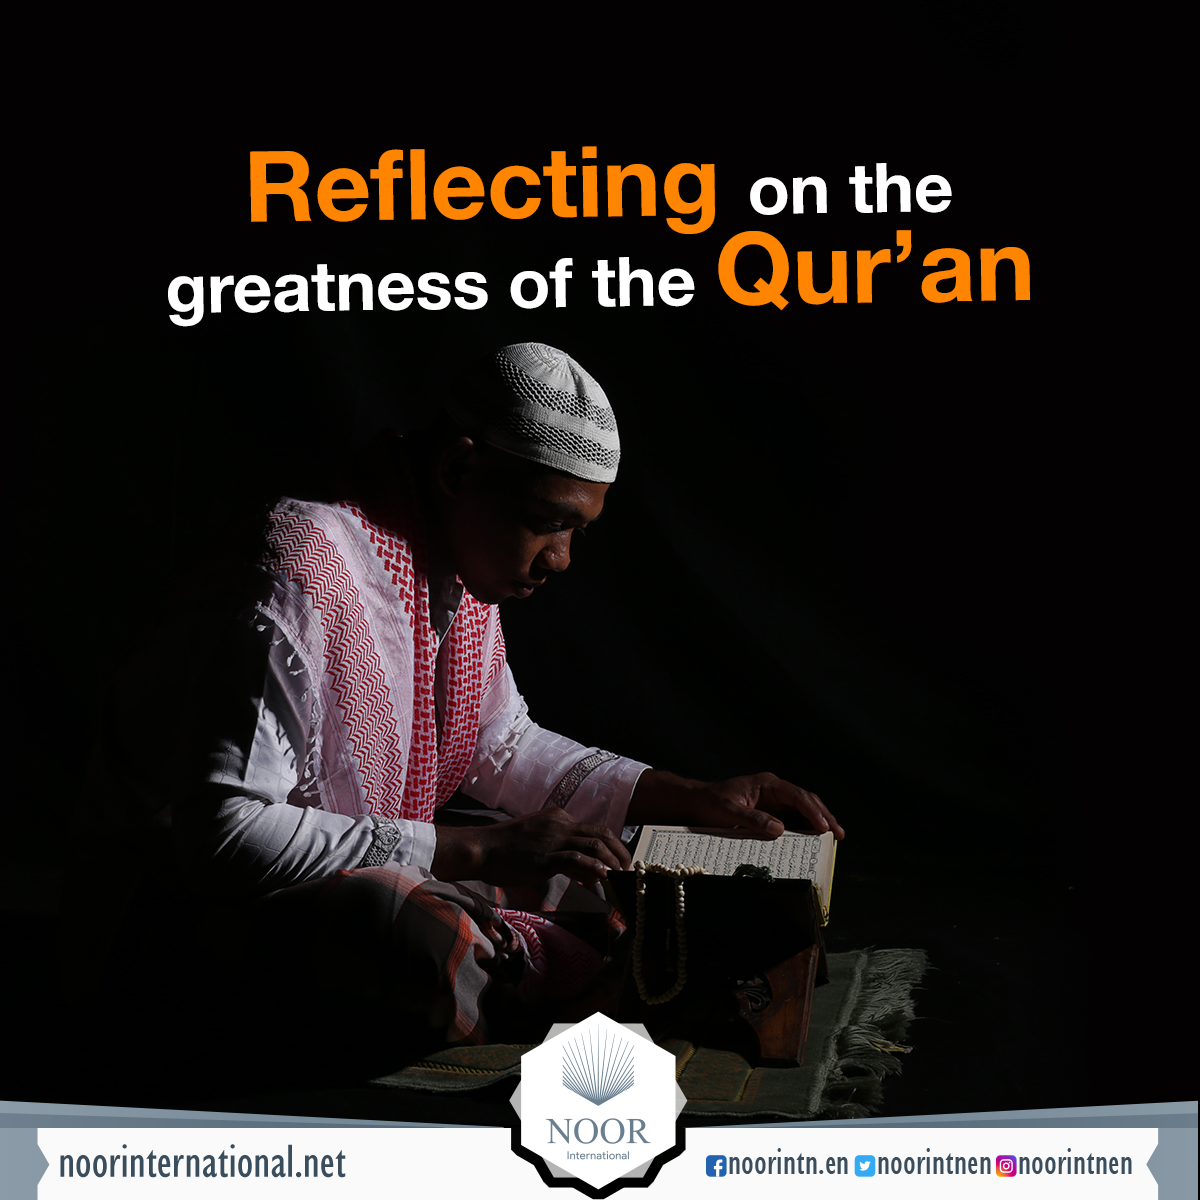 Reflecting on the greatness of the Qur’an